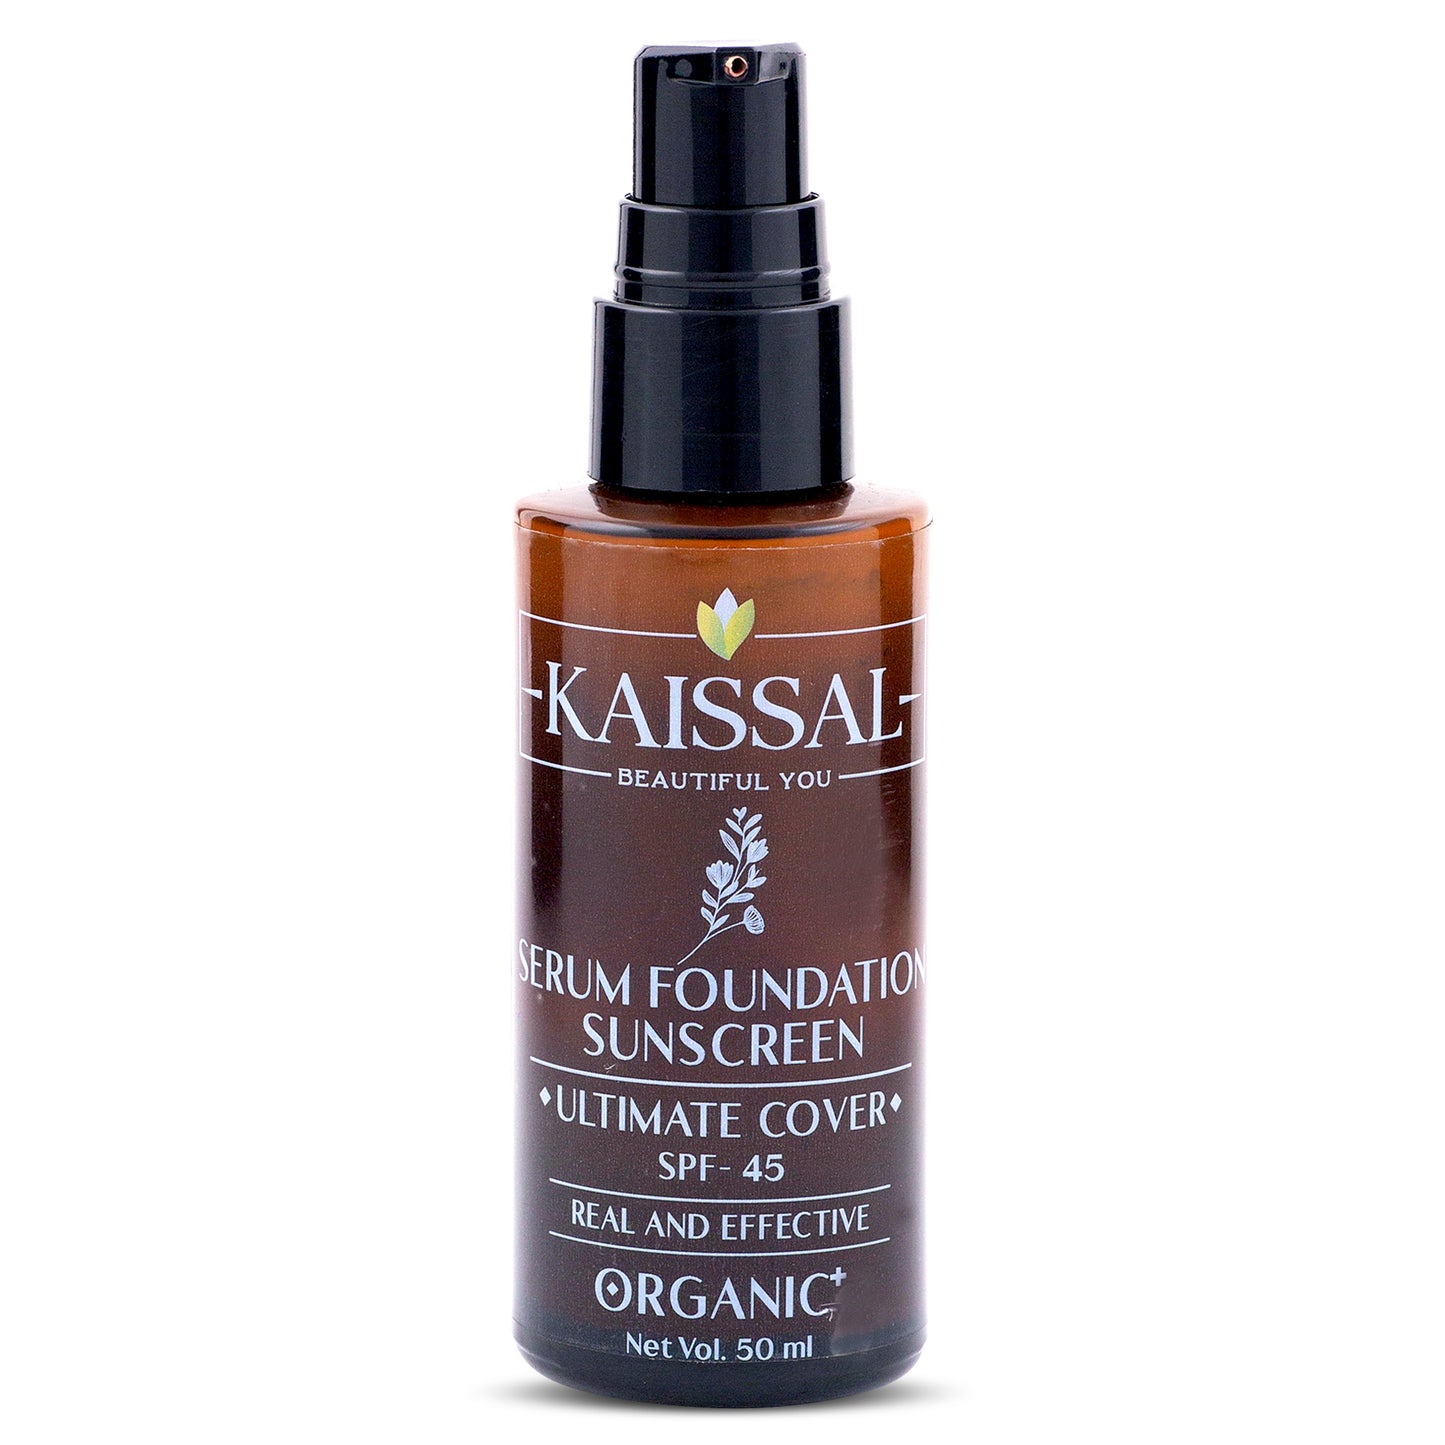 Kaissal's Serum Foundation Sunscreen: The Perfect Blend of Sunscreen and Skincare - SPF-45 - 50gm